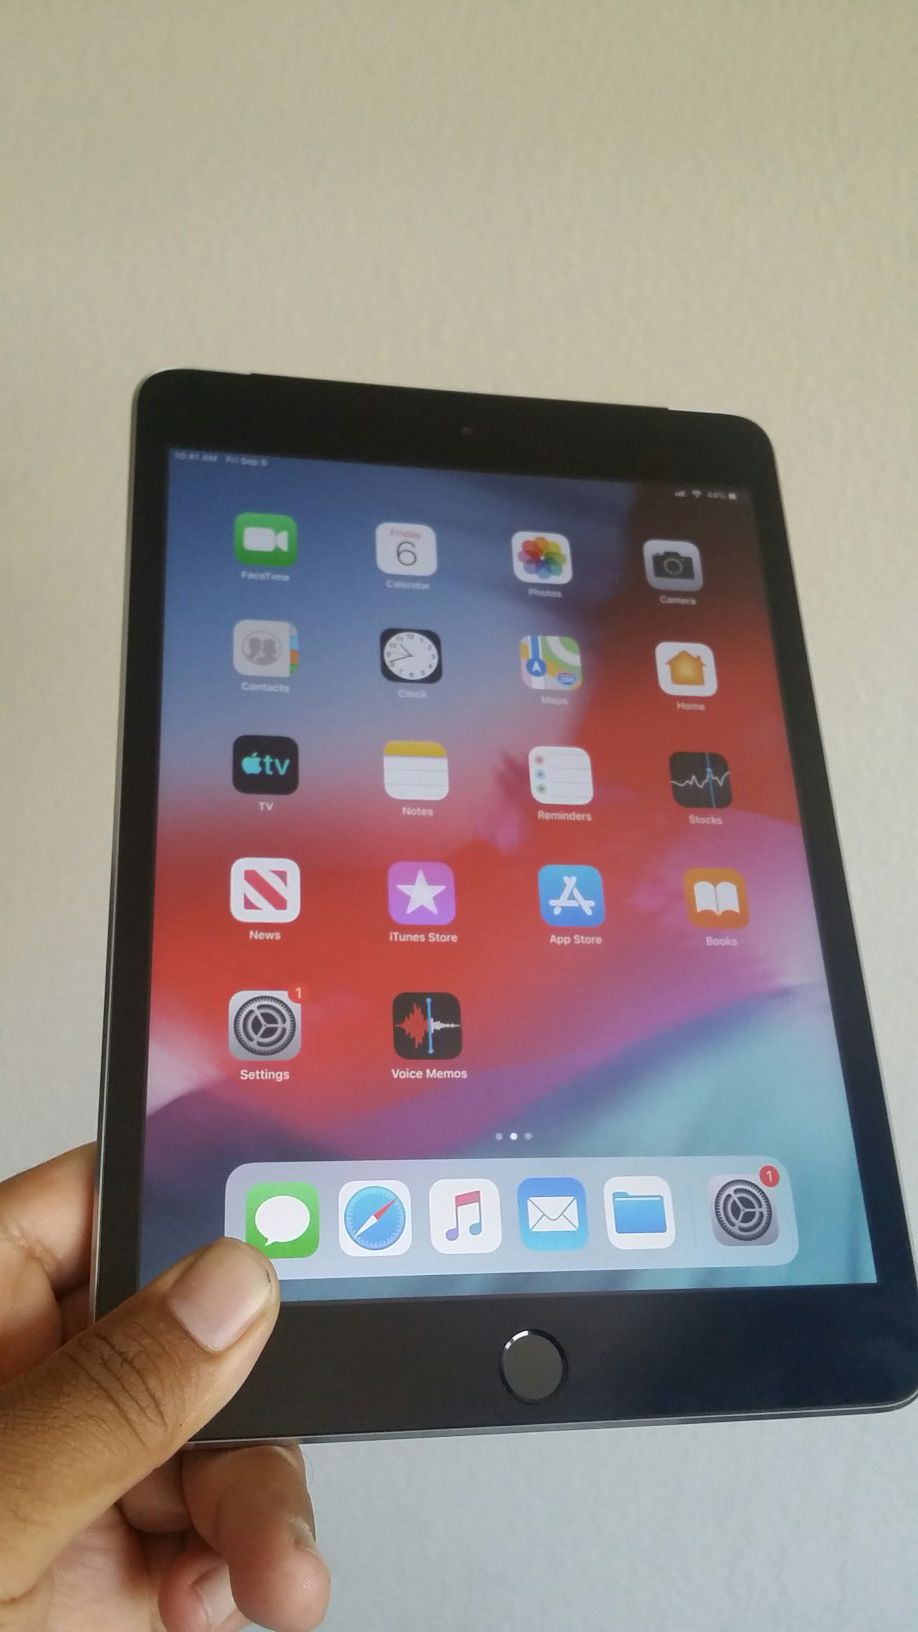 Apple IPad Mini 3 (Retina Display / Touch ID / IOS 12) 16GB WiFi + Cellular (Unlocked) with complete Accessories